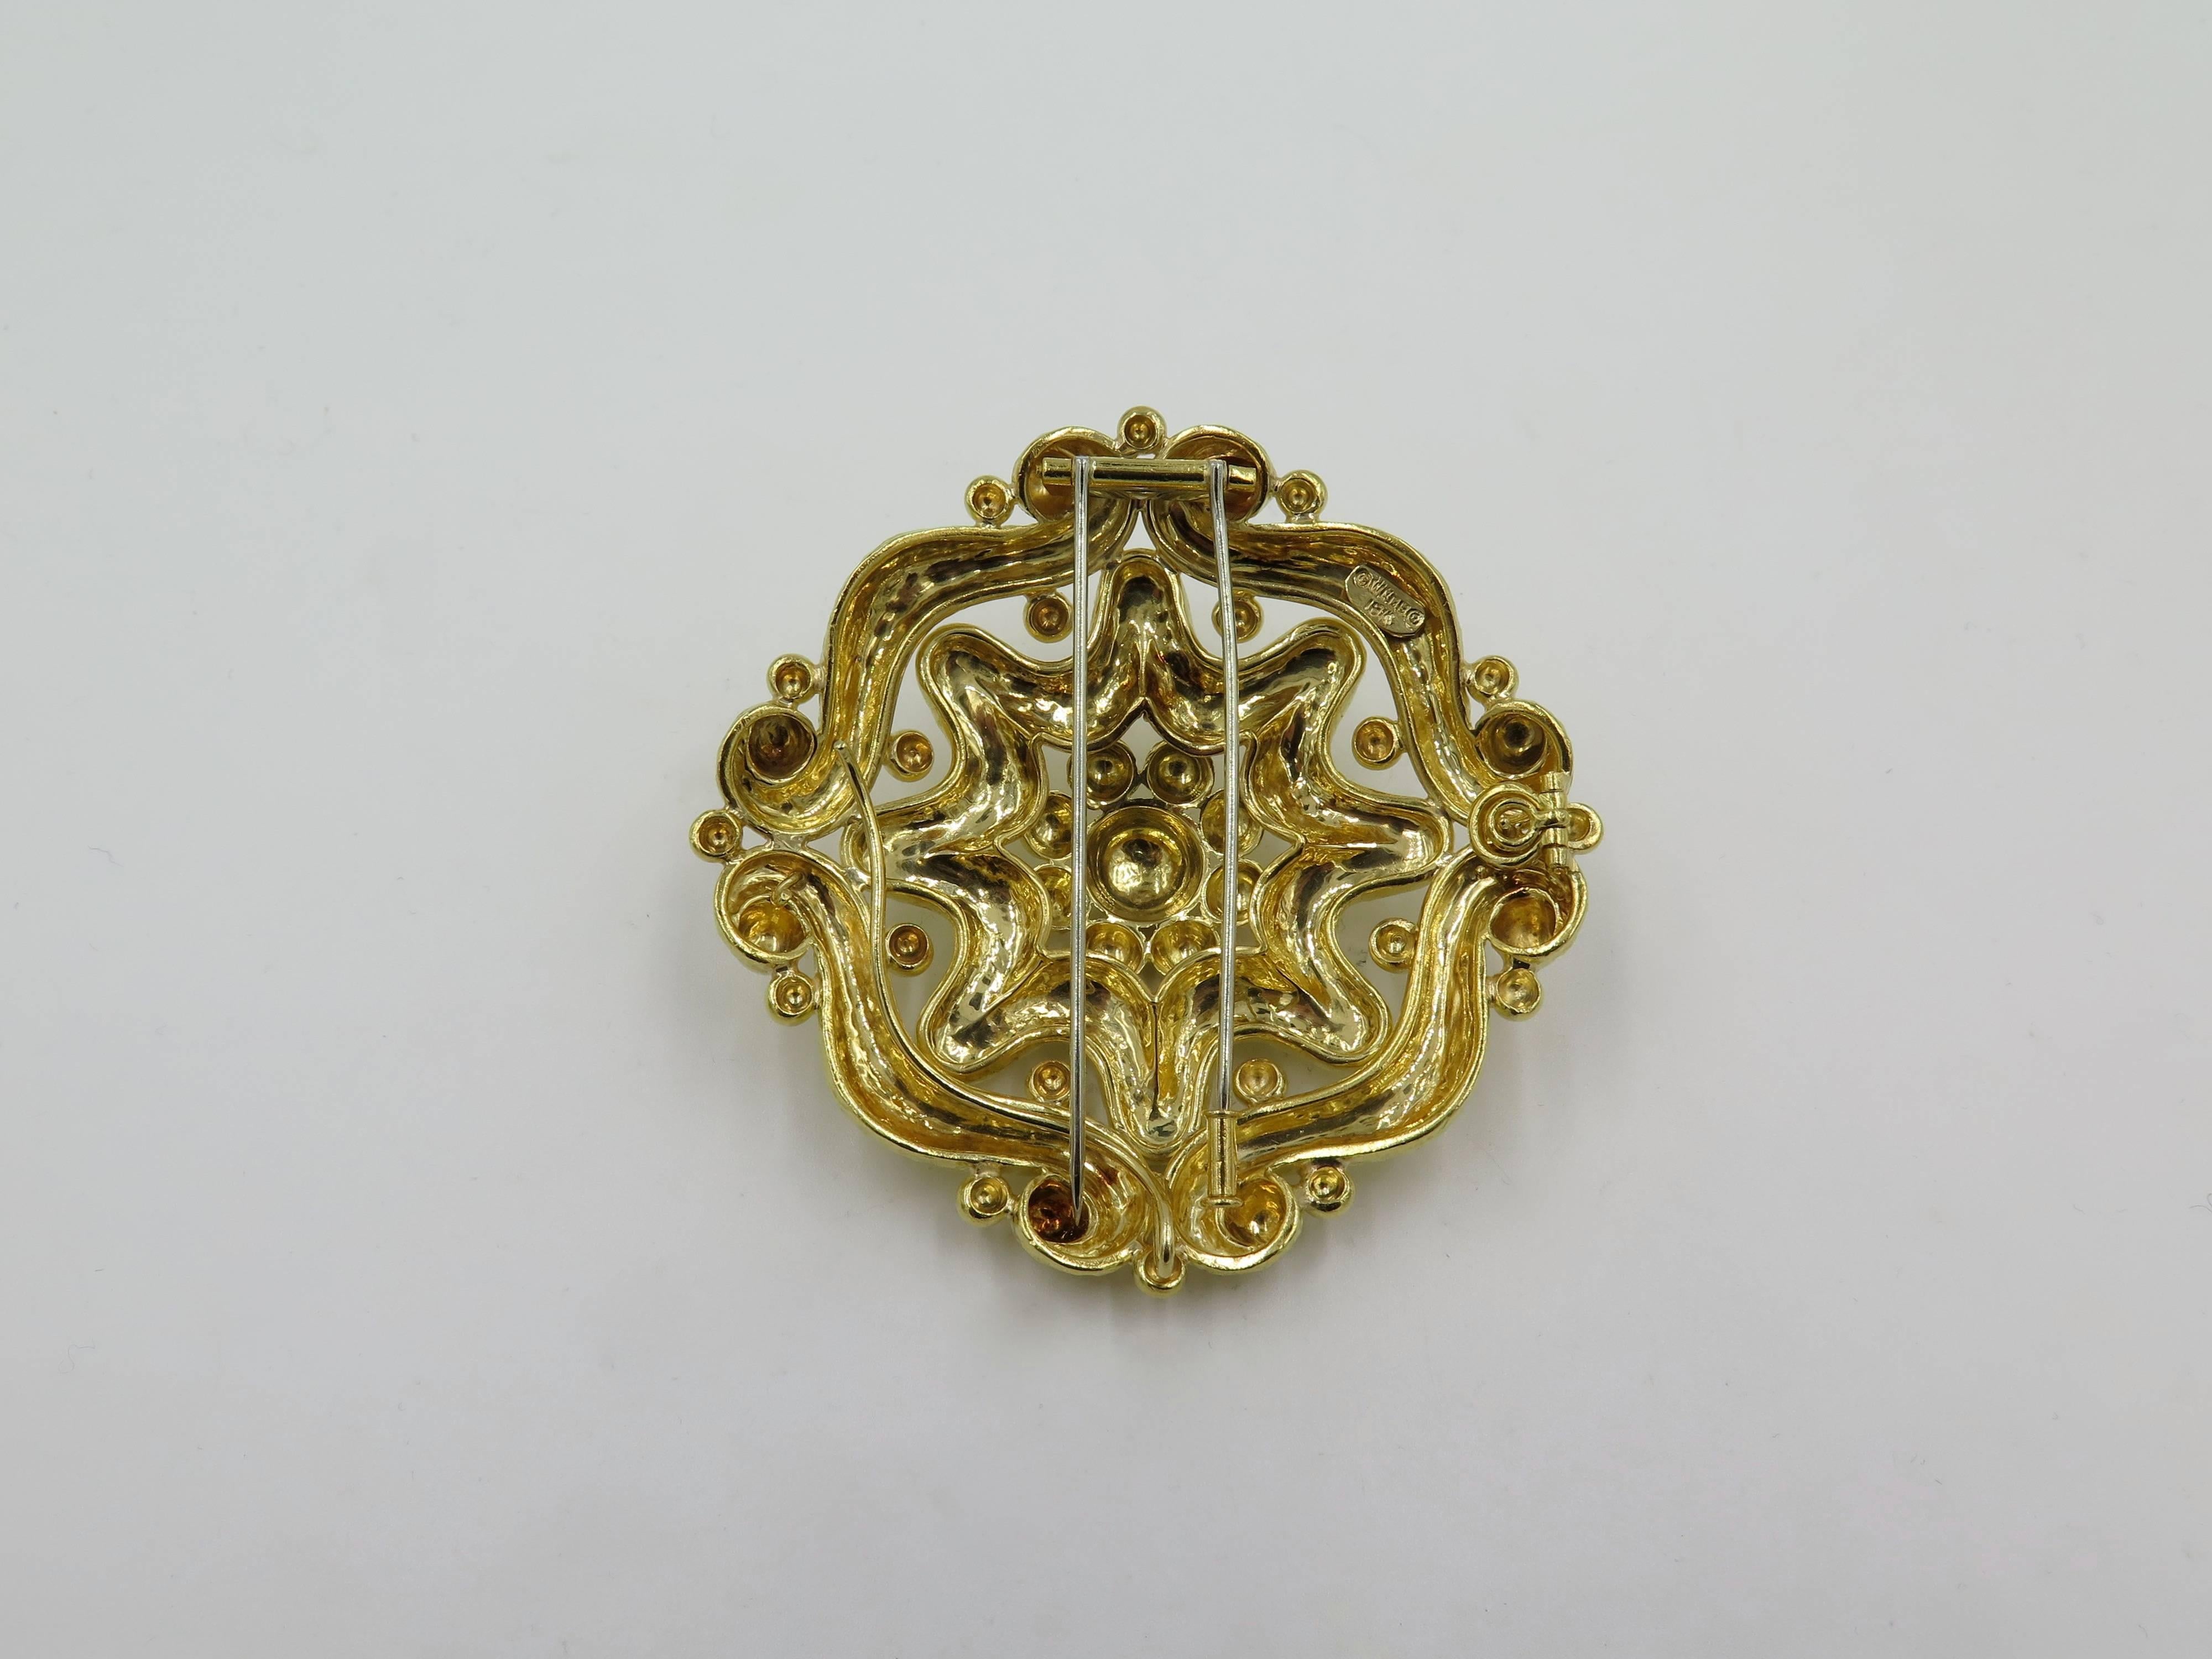 An 18 karat yellow gold brooch. David Webb. Designed as a hammed gold openwork plaque of stylized floral design, enhanced by gold beads. Diameter is approximately 2 1/2 inches. Gross weight is approximately 65.6 grams